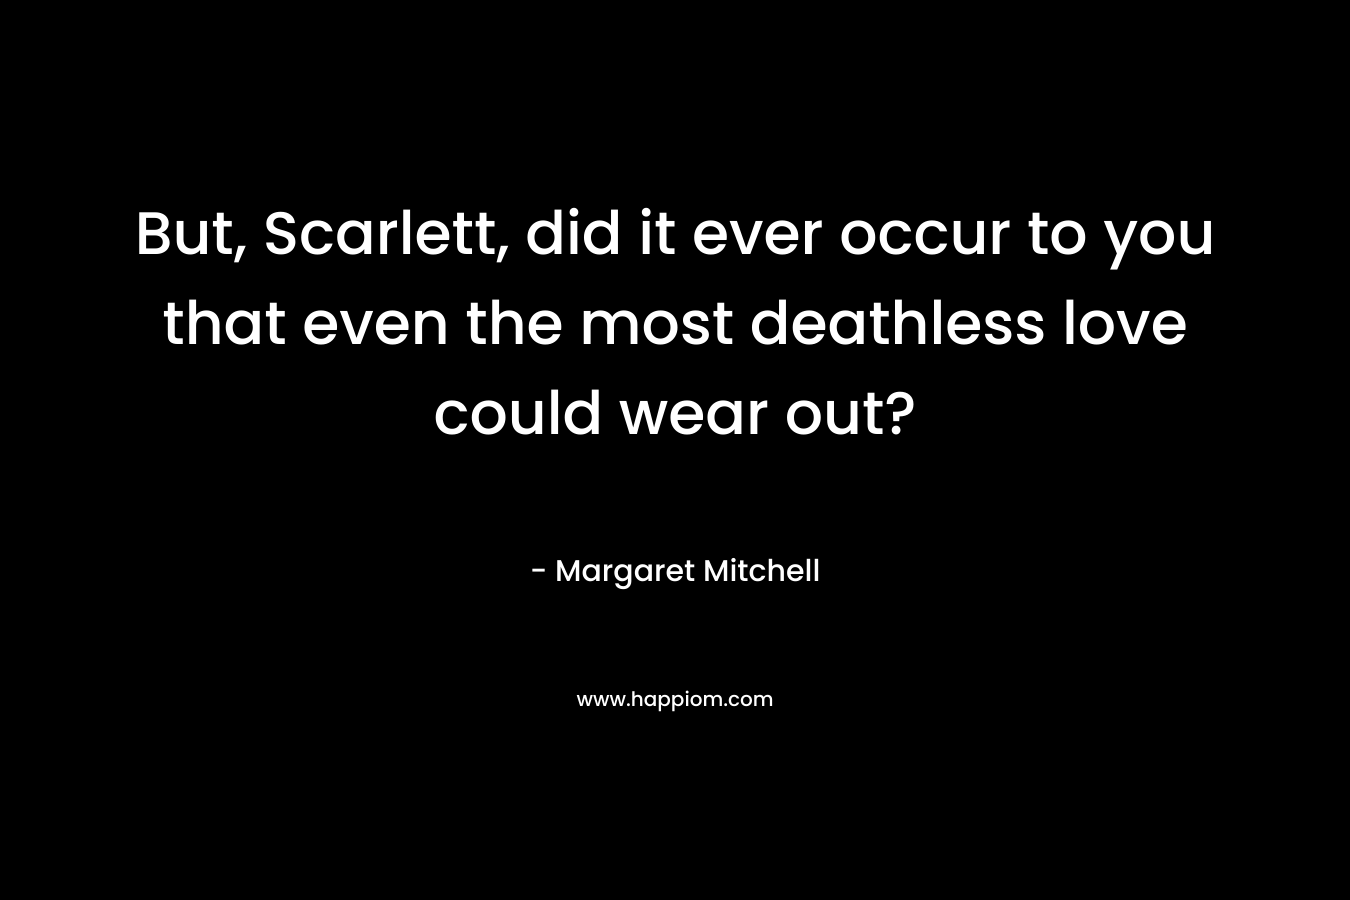 But, Scarlett, did it ever occur to you that even the most deathless love could wear out?